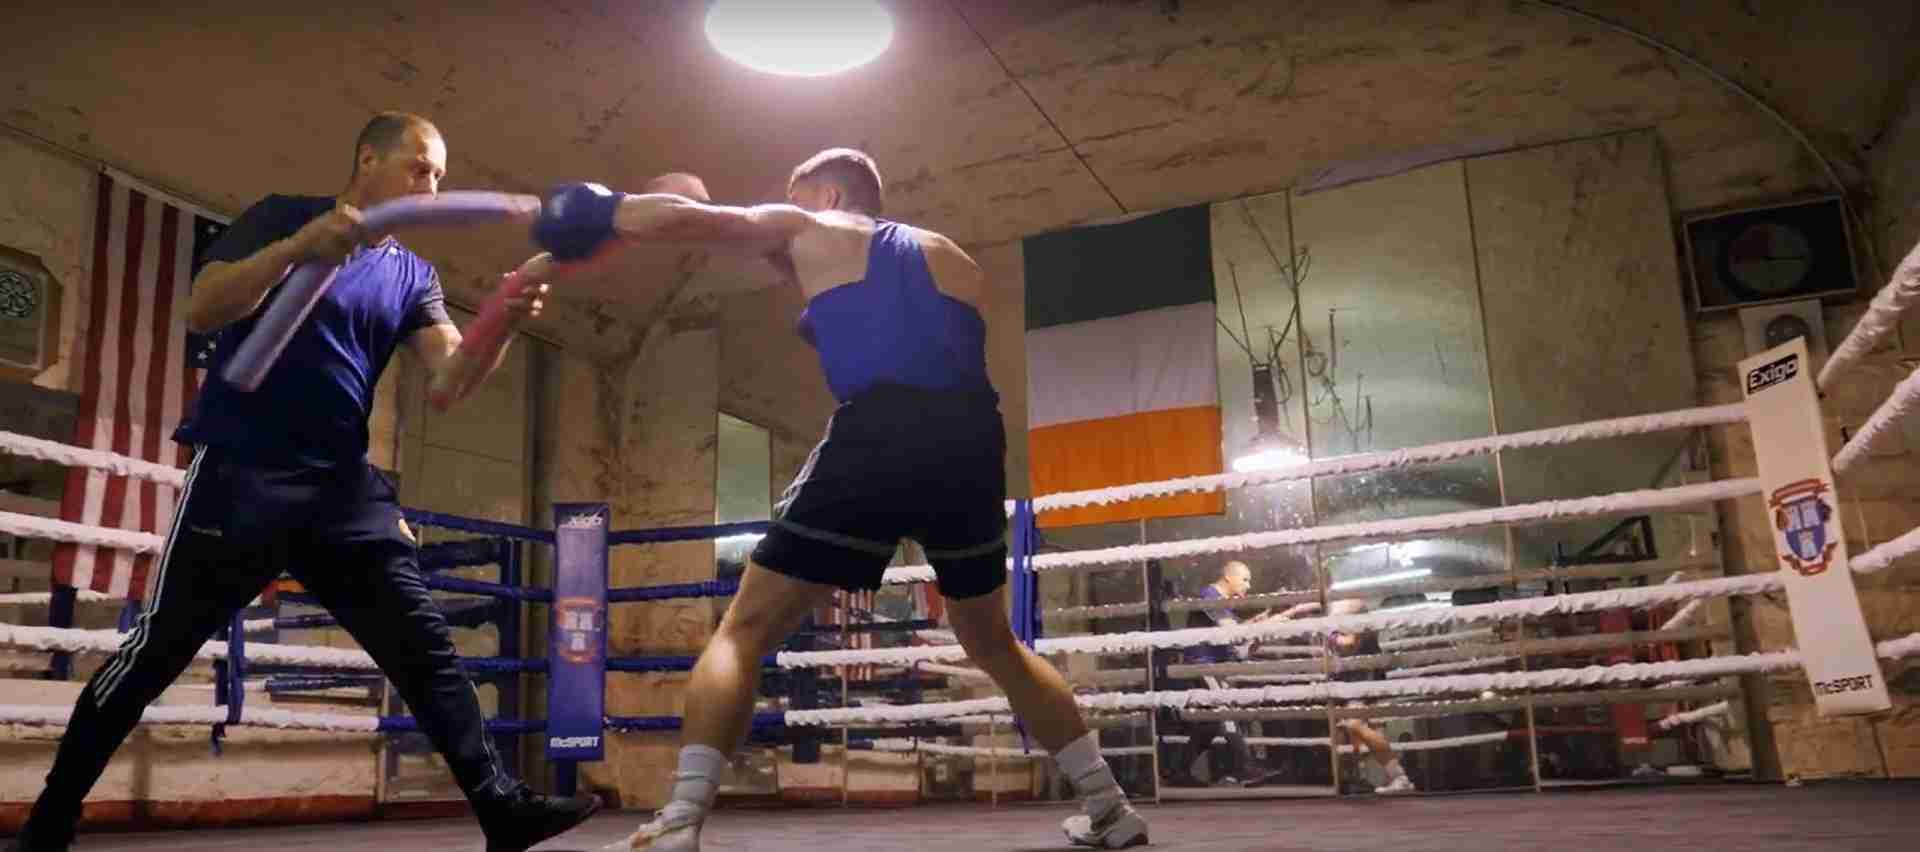 Actor and Olympian Hits The Big Time In Boxing